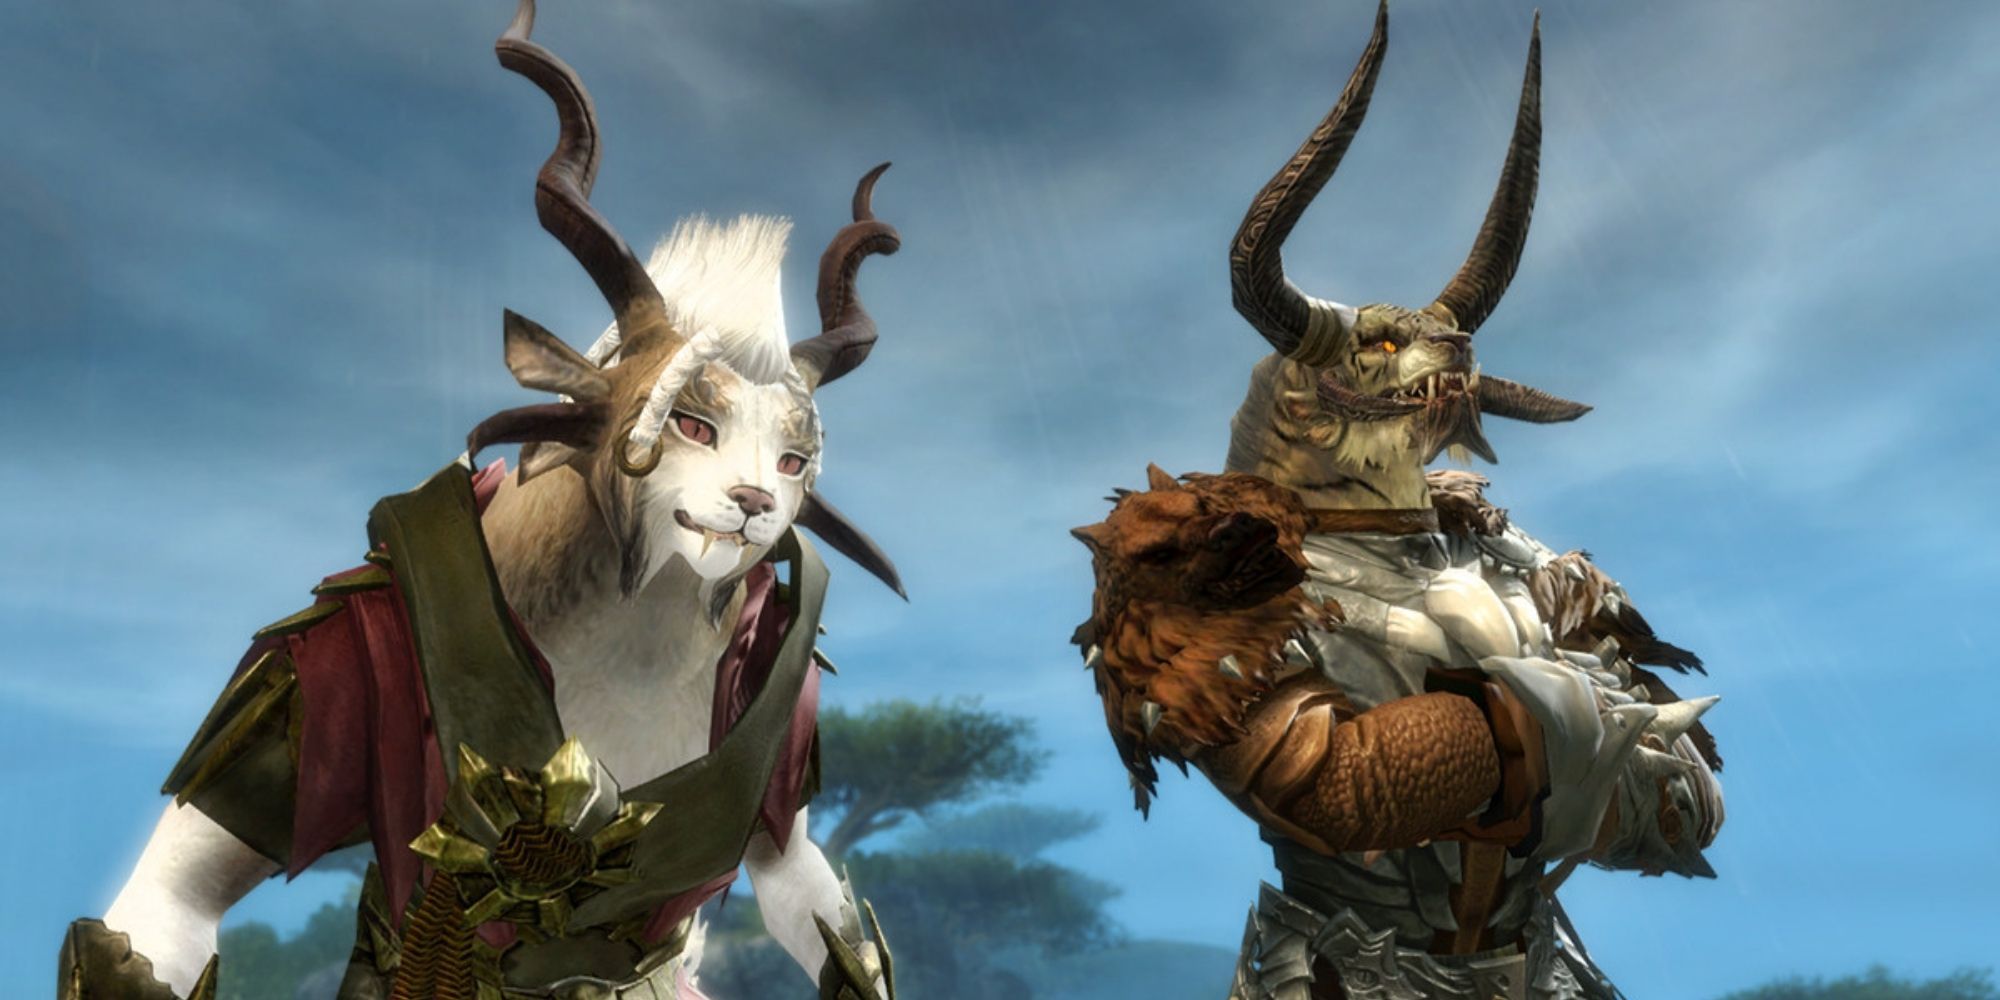 Guild Wars 2 - Screenshot of two char characters (male on right, female on left) standing side by side